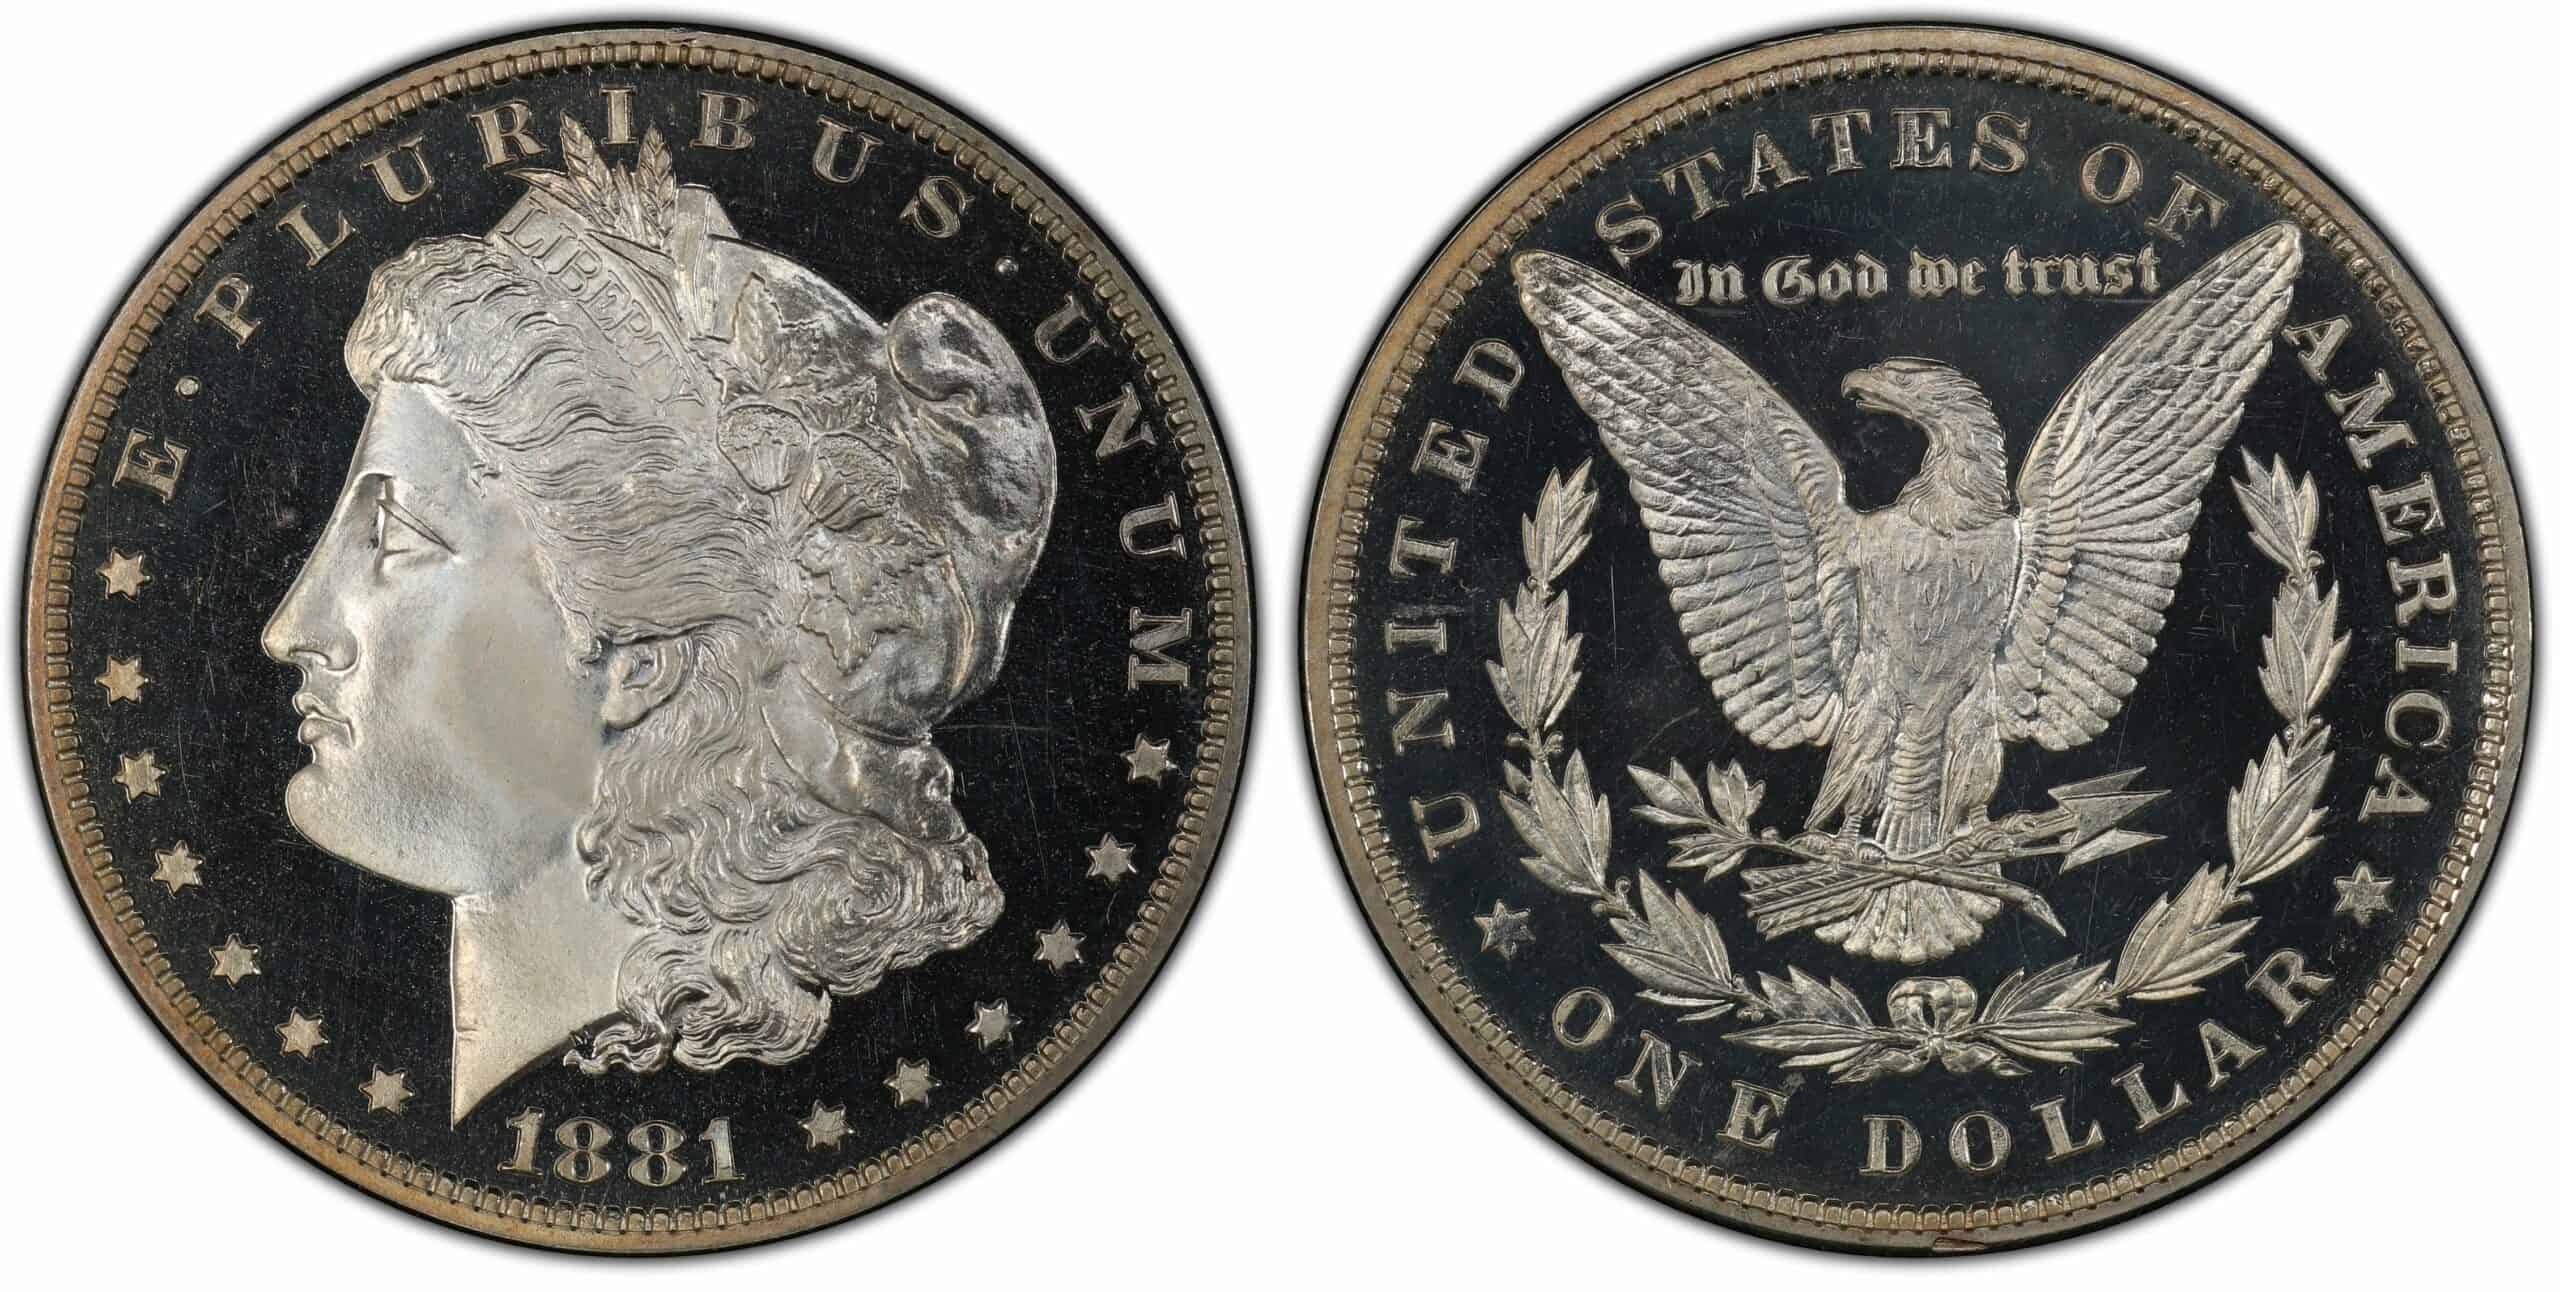 1881 Proof Silver Dollar Value